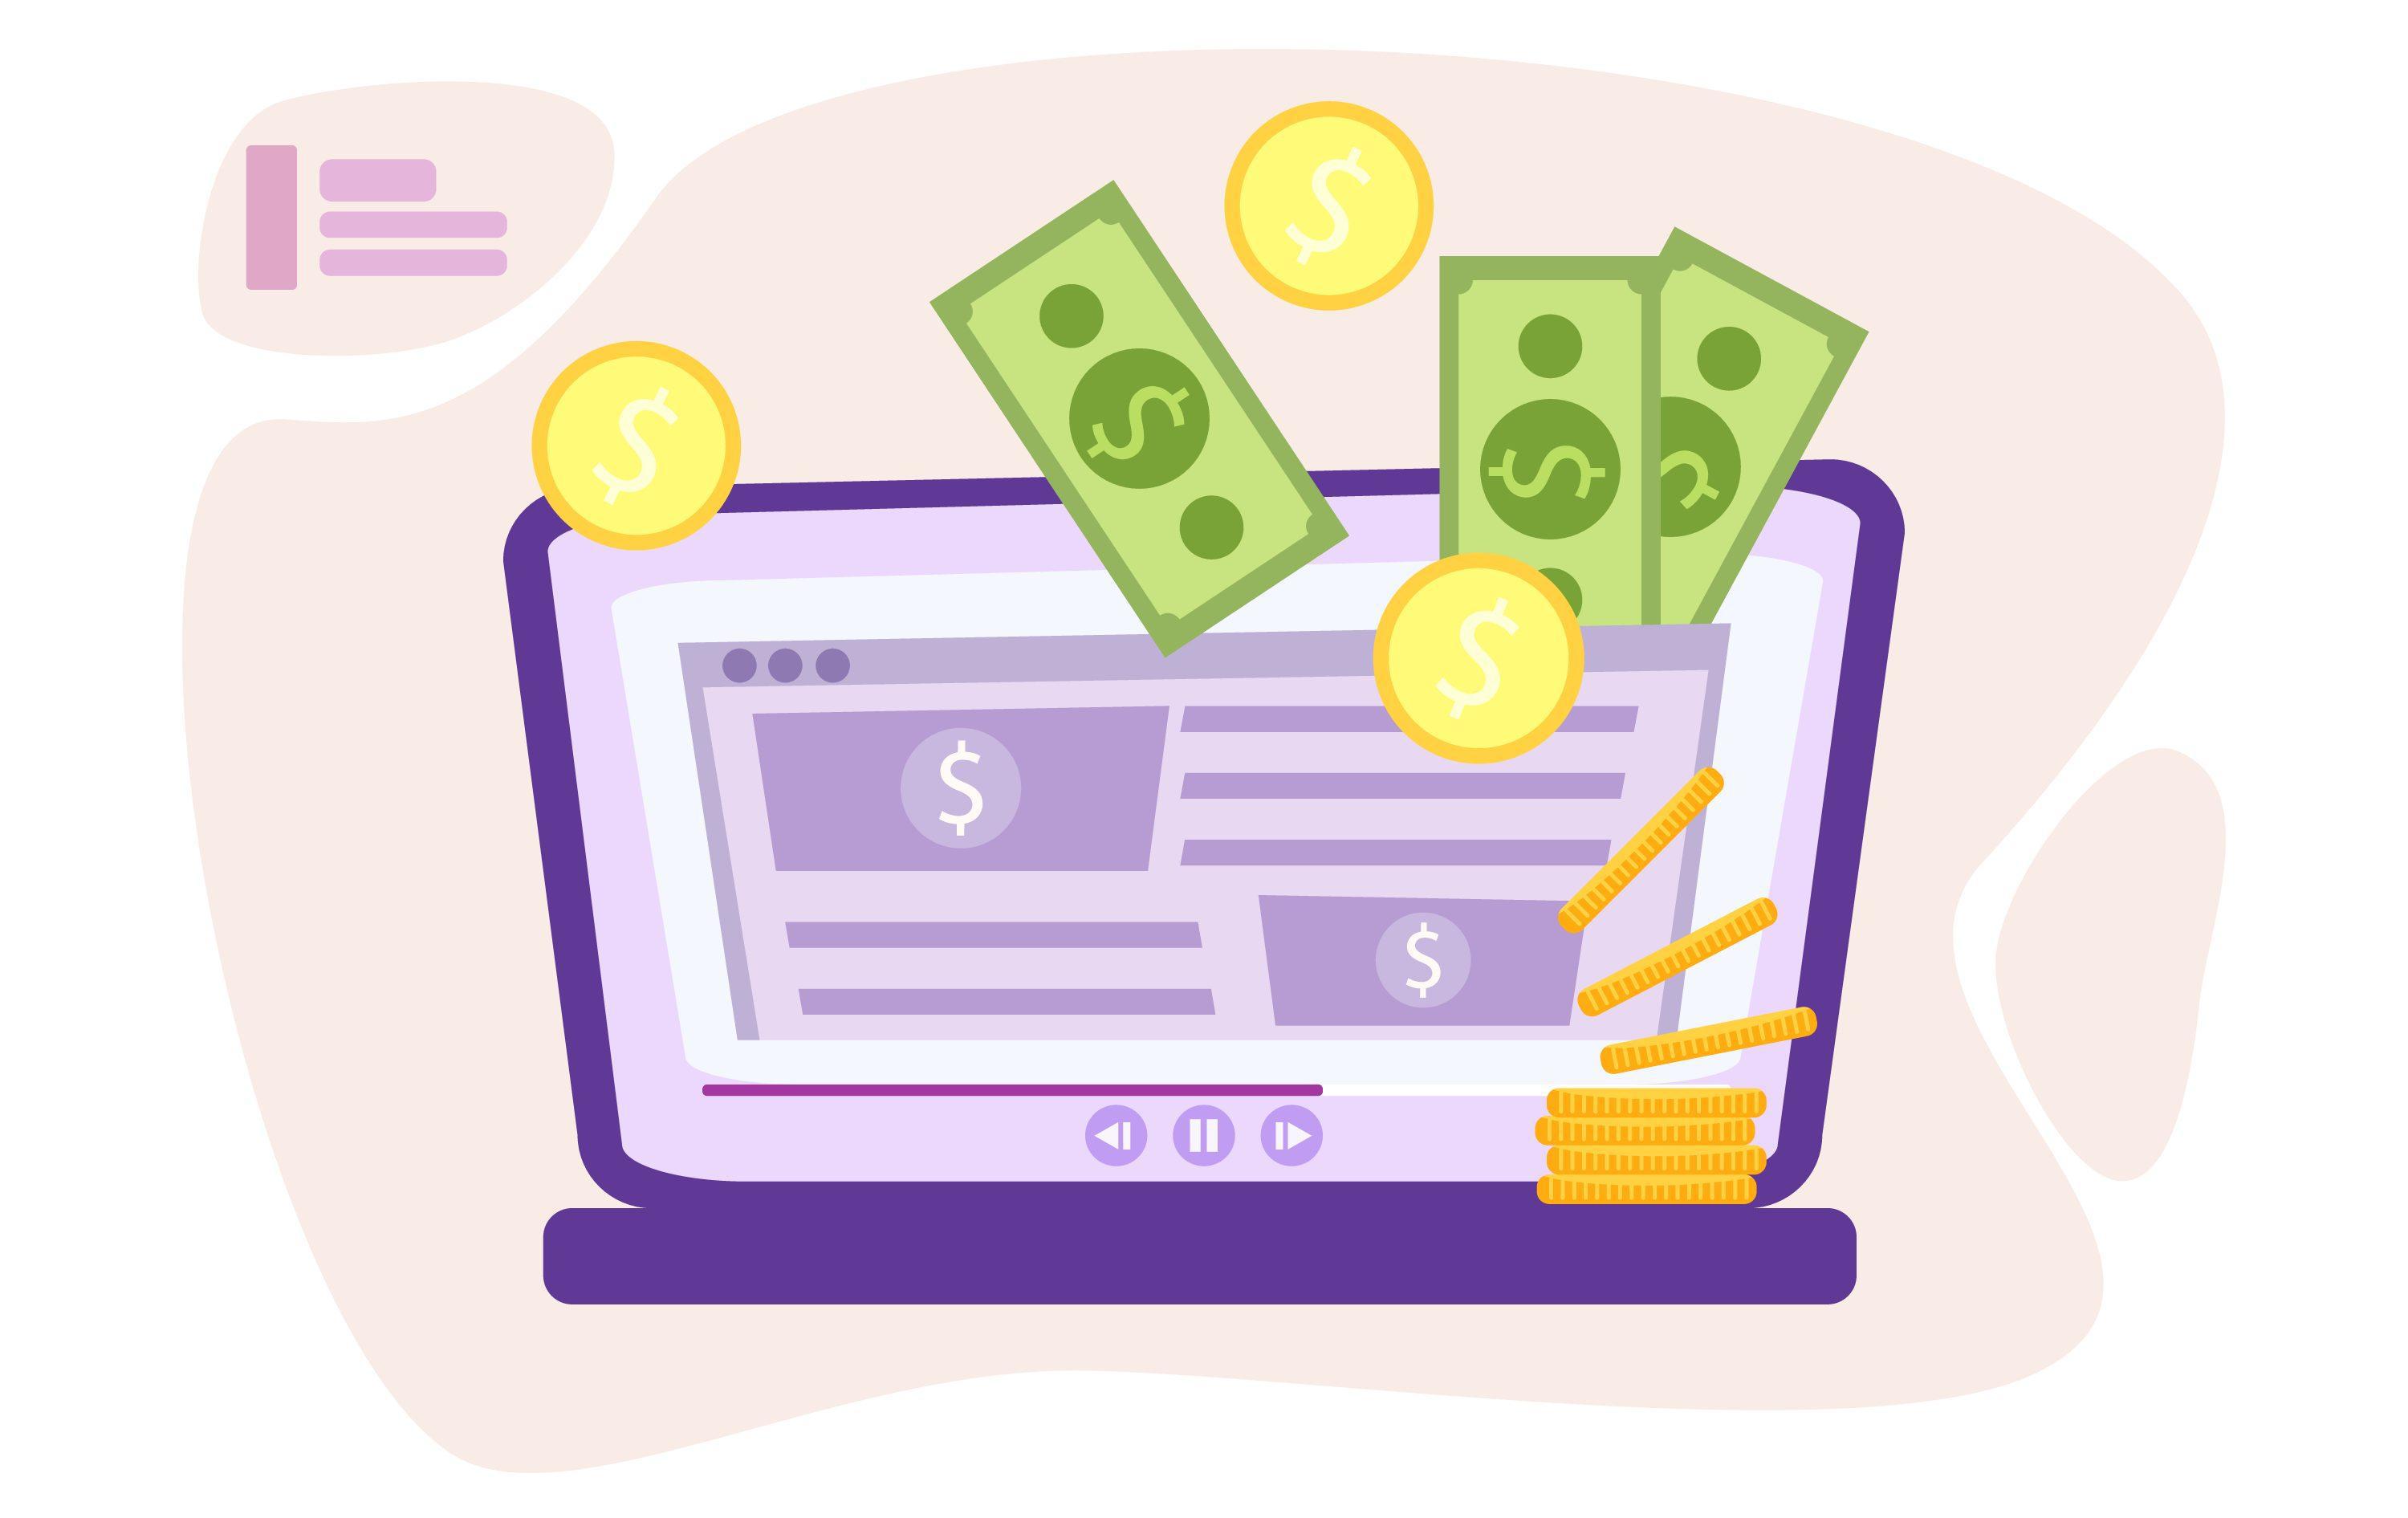 How to Monetize a Blog